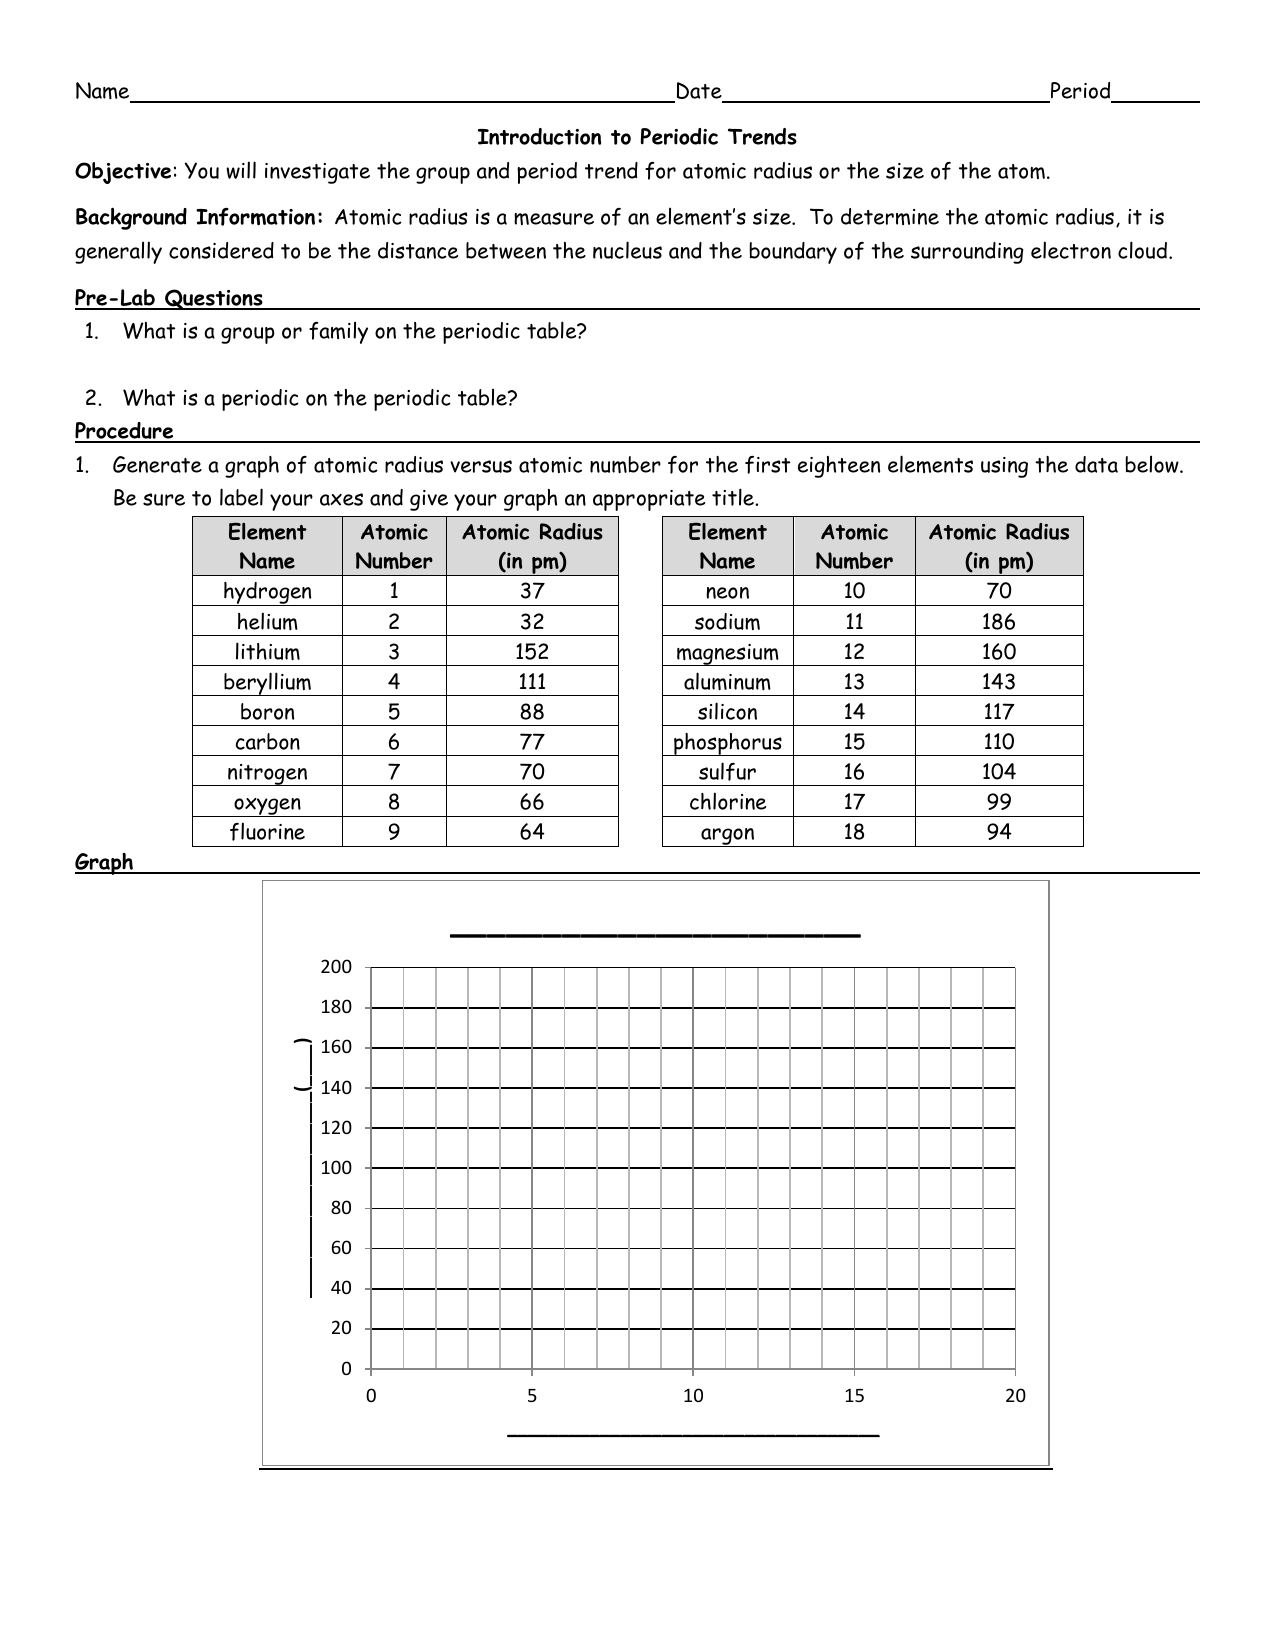 trends-in-the-periodic-table-graphing-worksheet-answers-brokeasshome